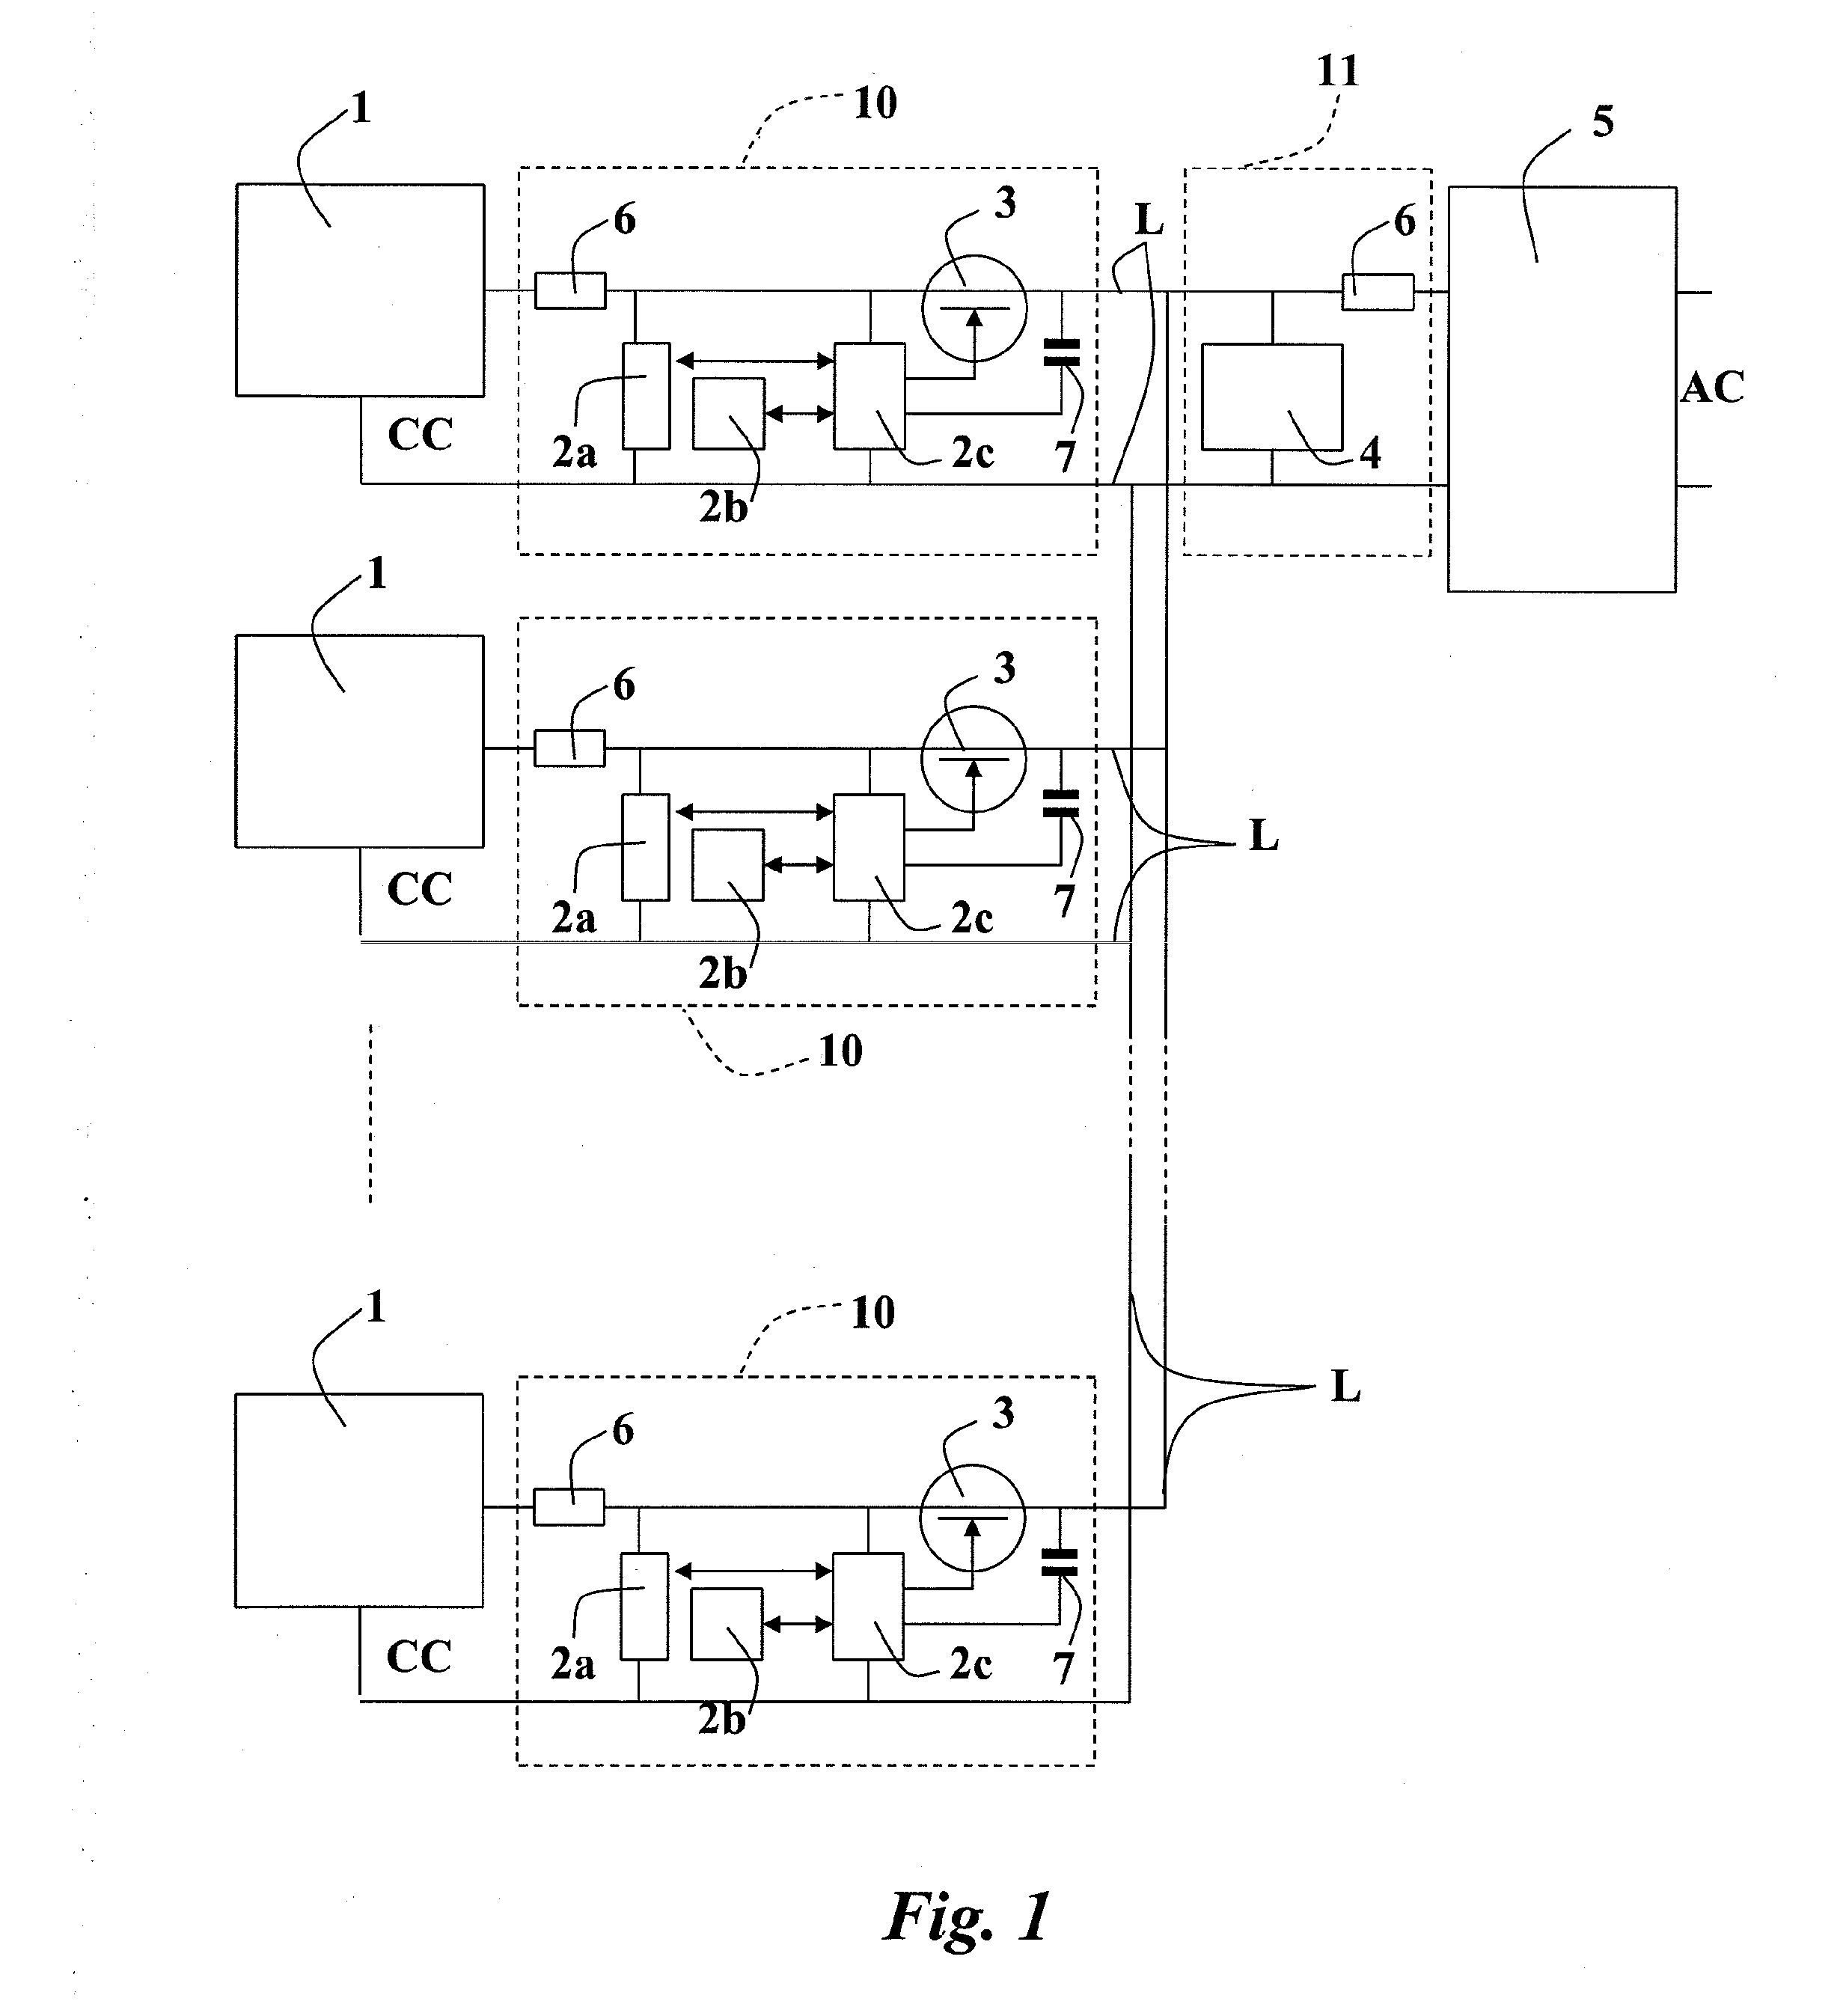 Antitheft and monitoring system for photovoltaic panels